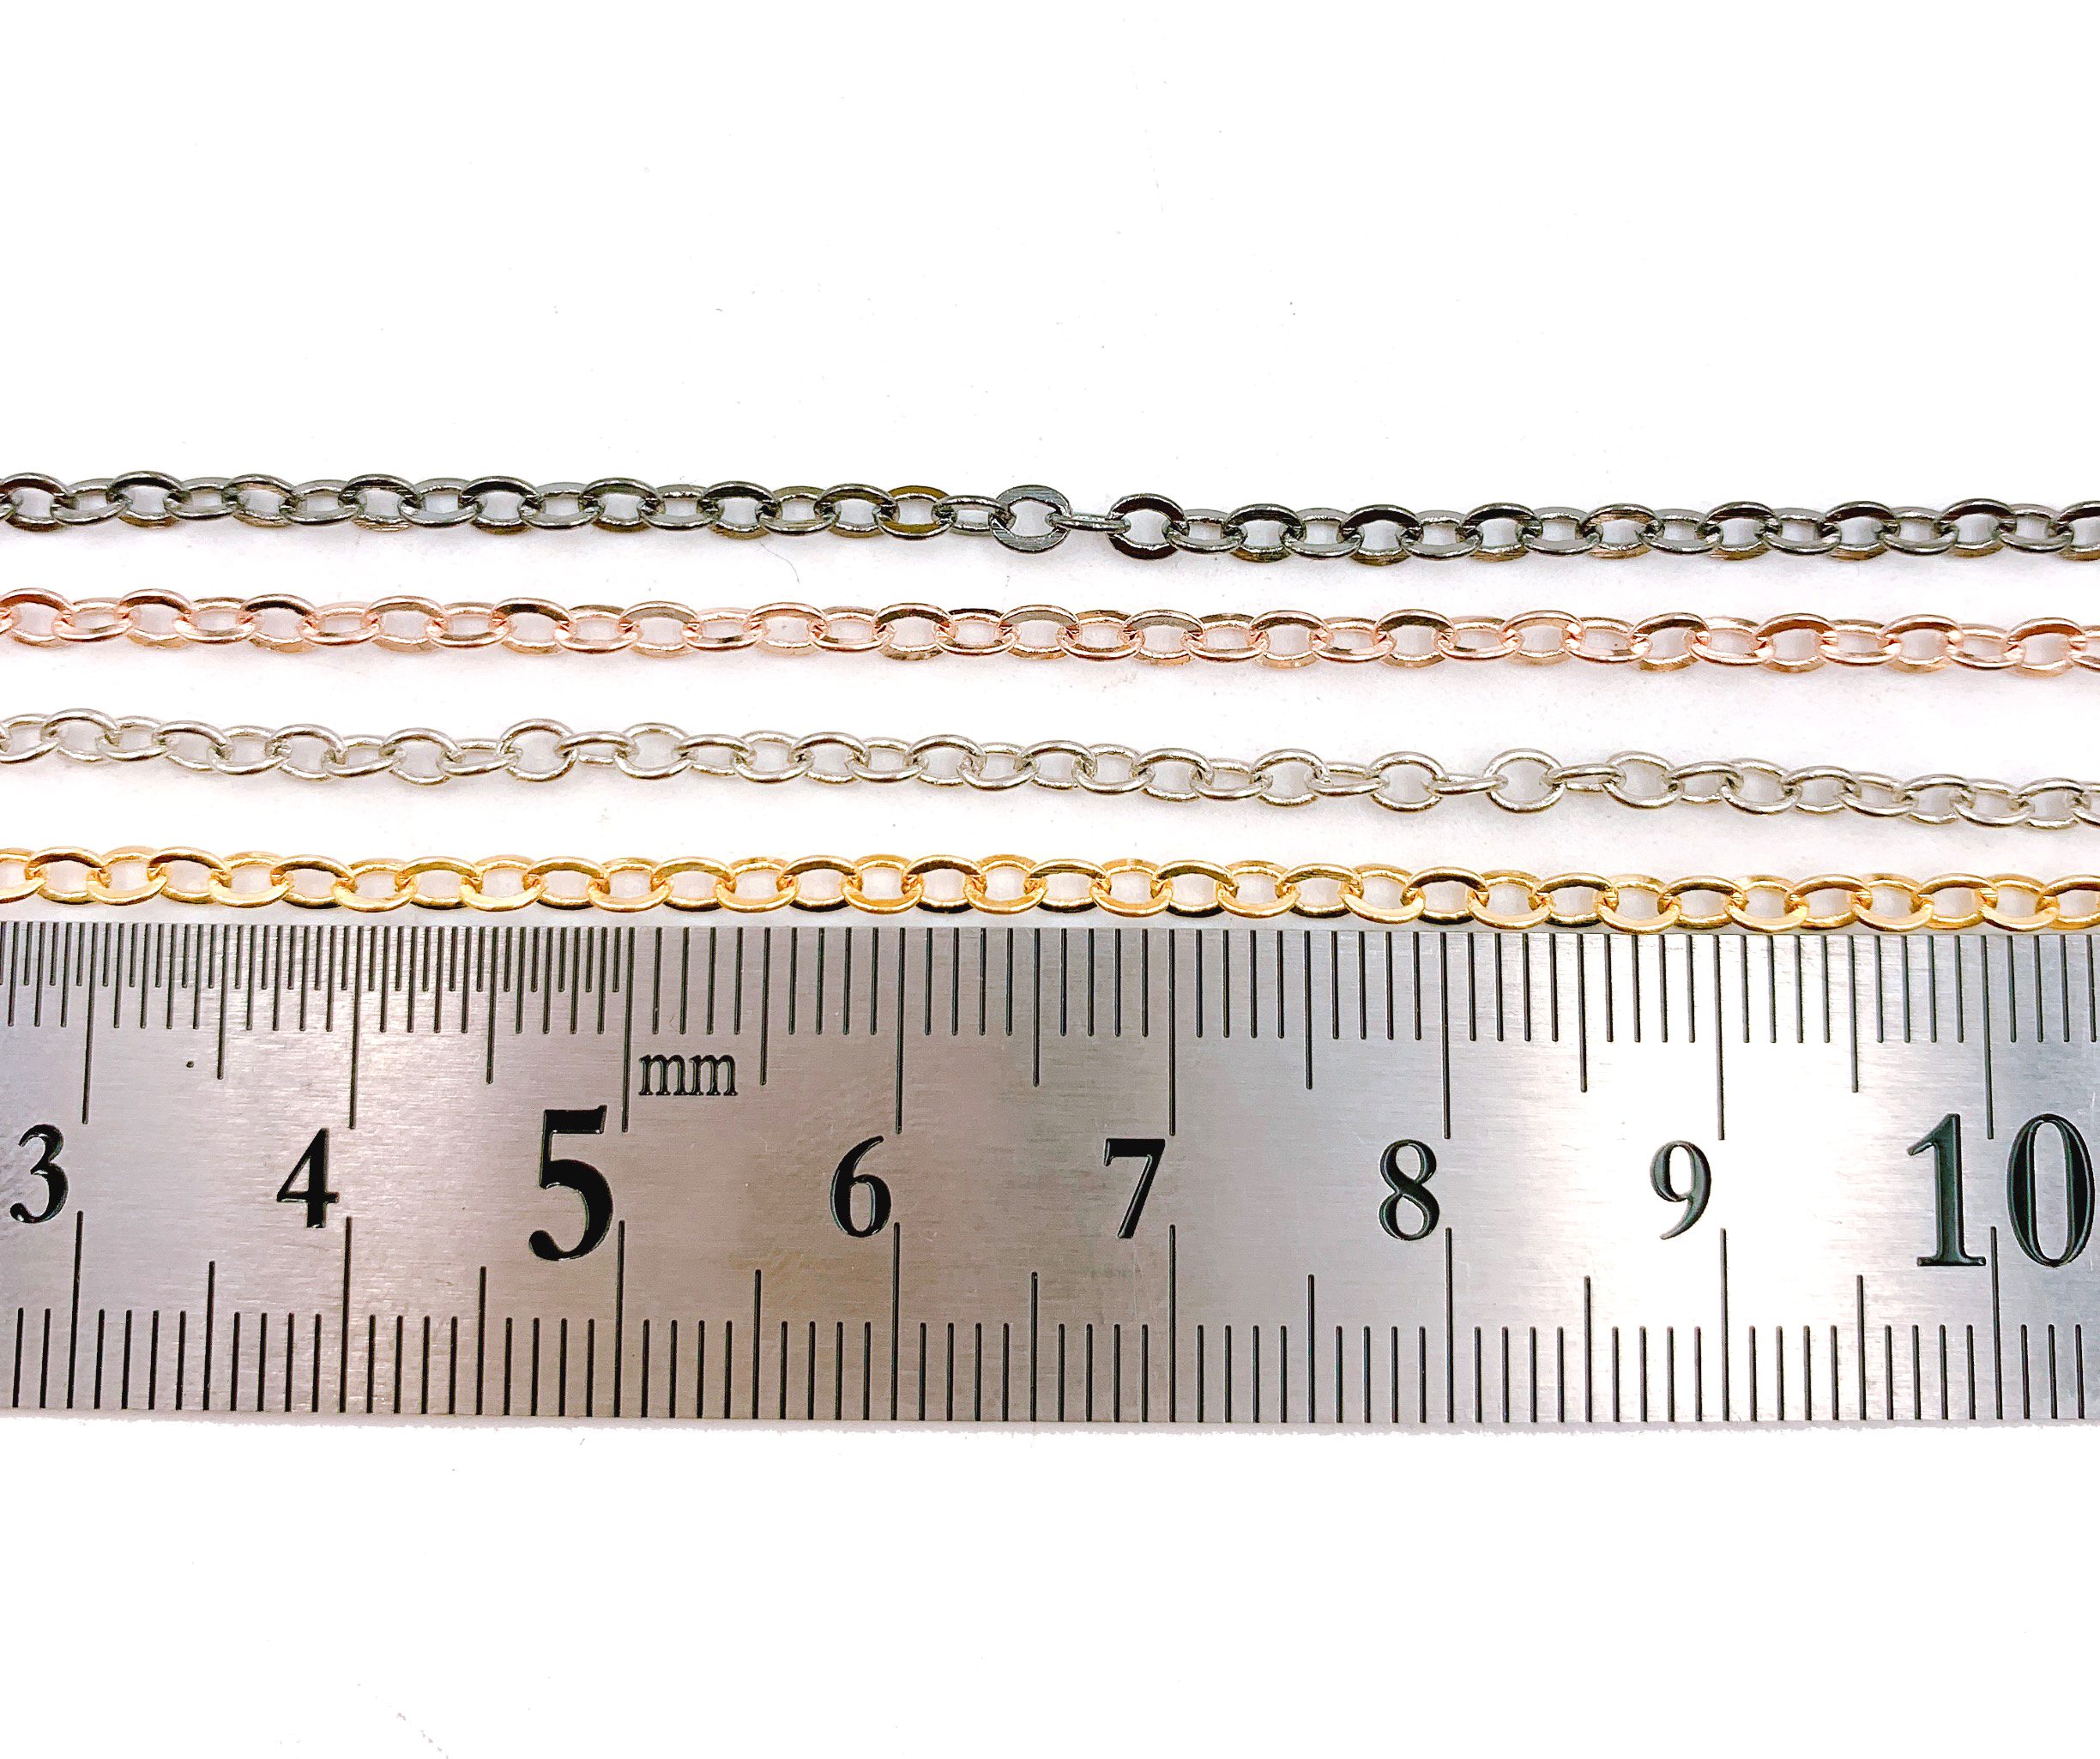 CH111 Gold Cable Chain by Yard for Jewelry making Lead Free Nickel Free Chain for Necklace Gold Filled Cable Chain 4mm